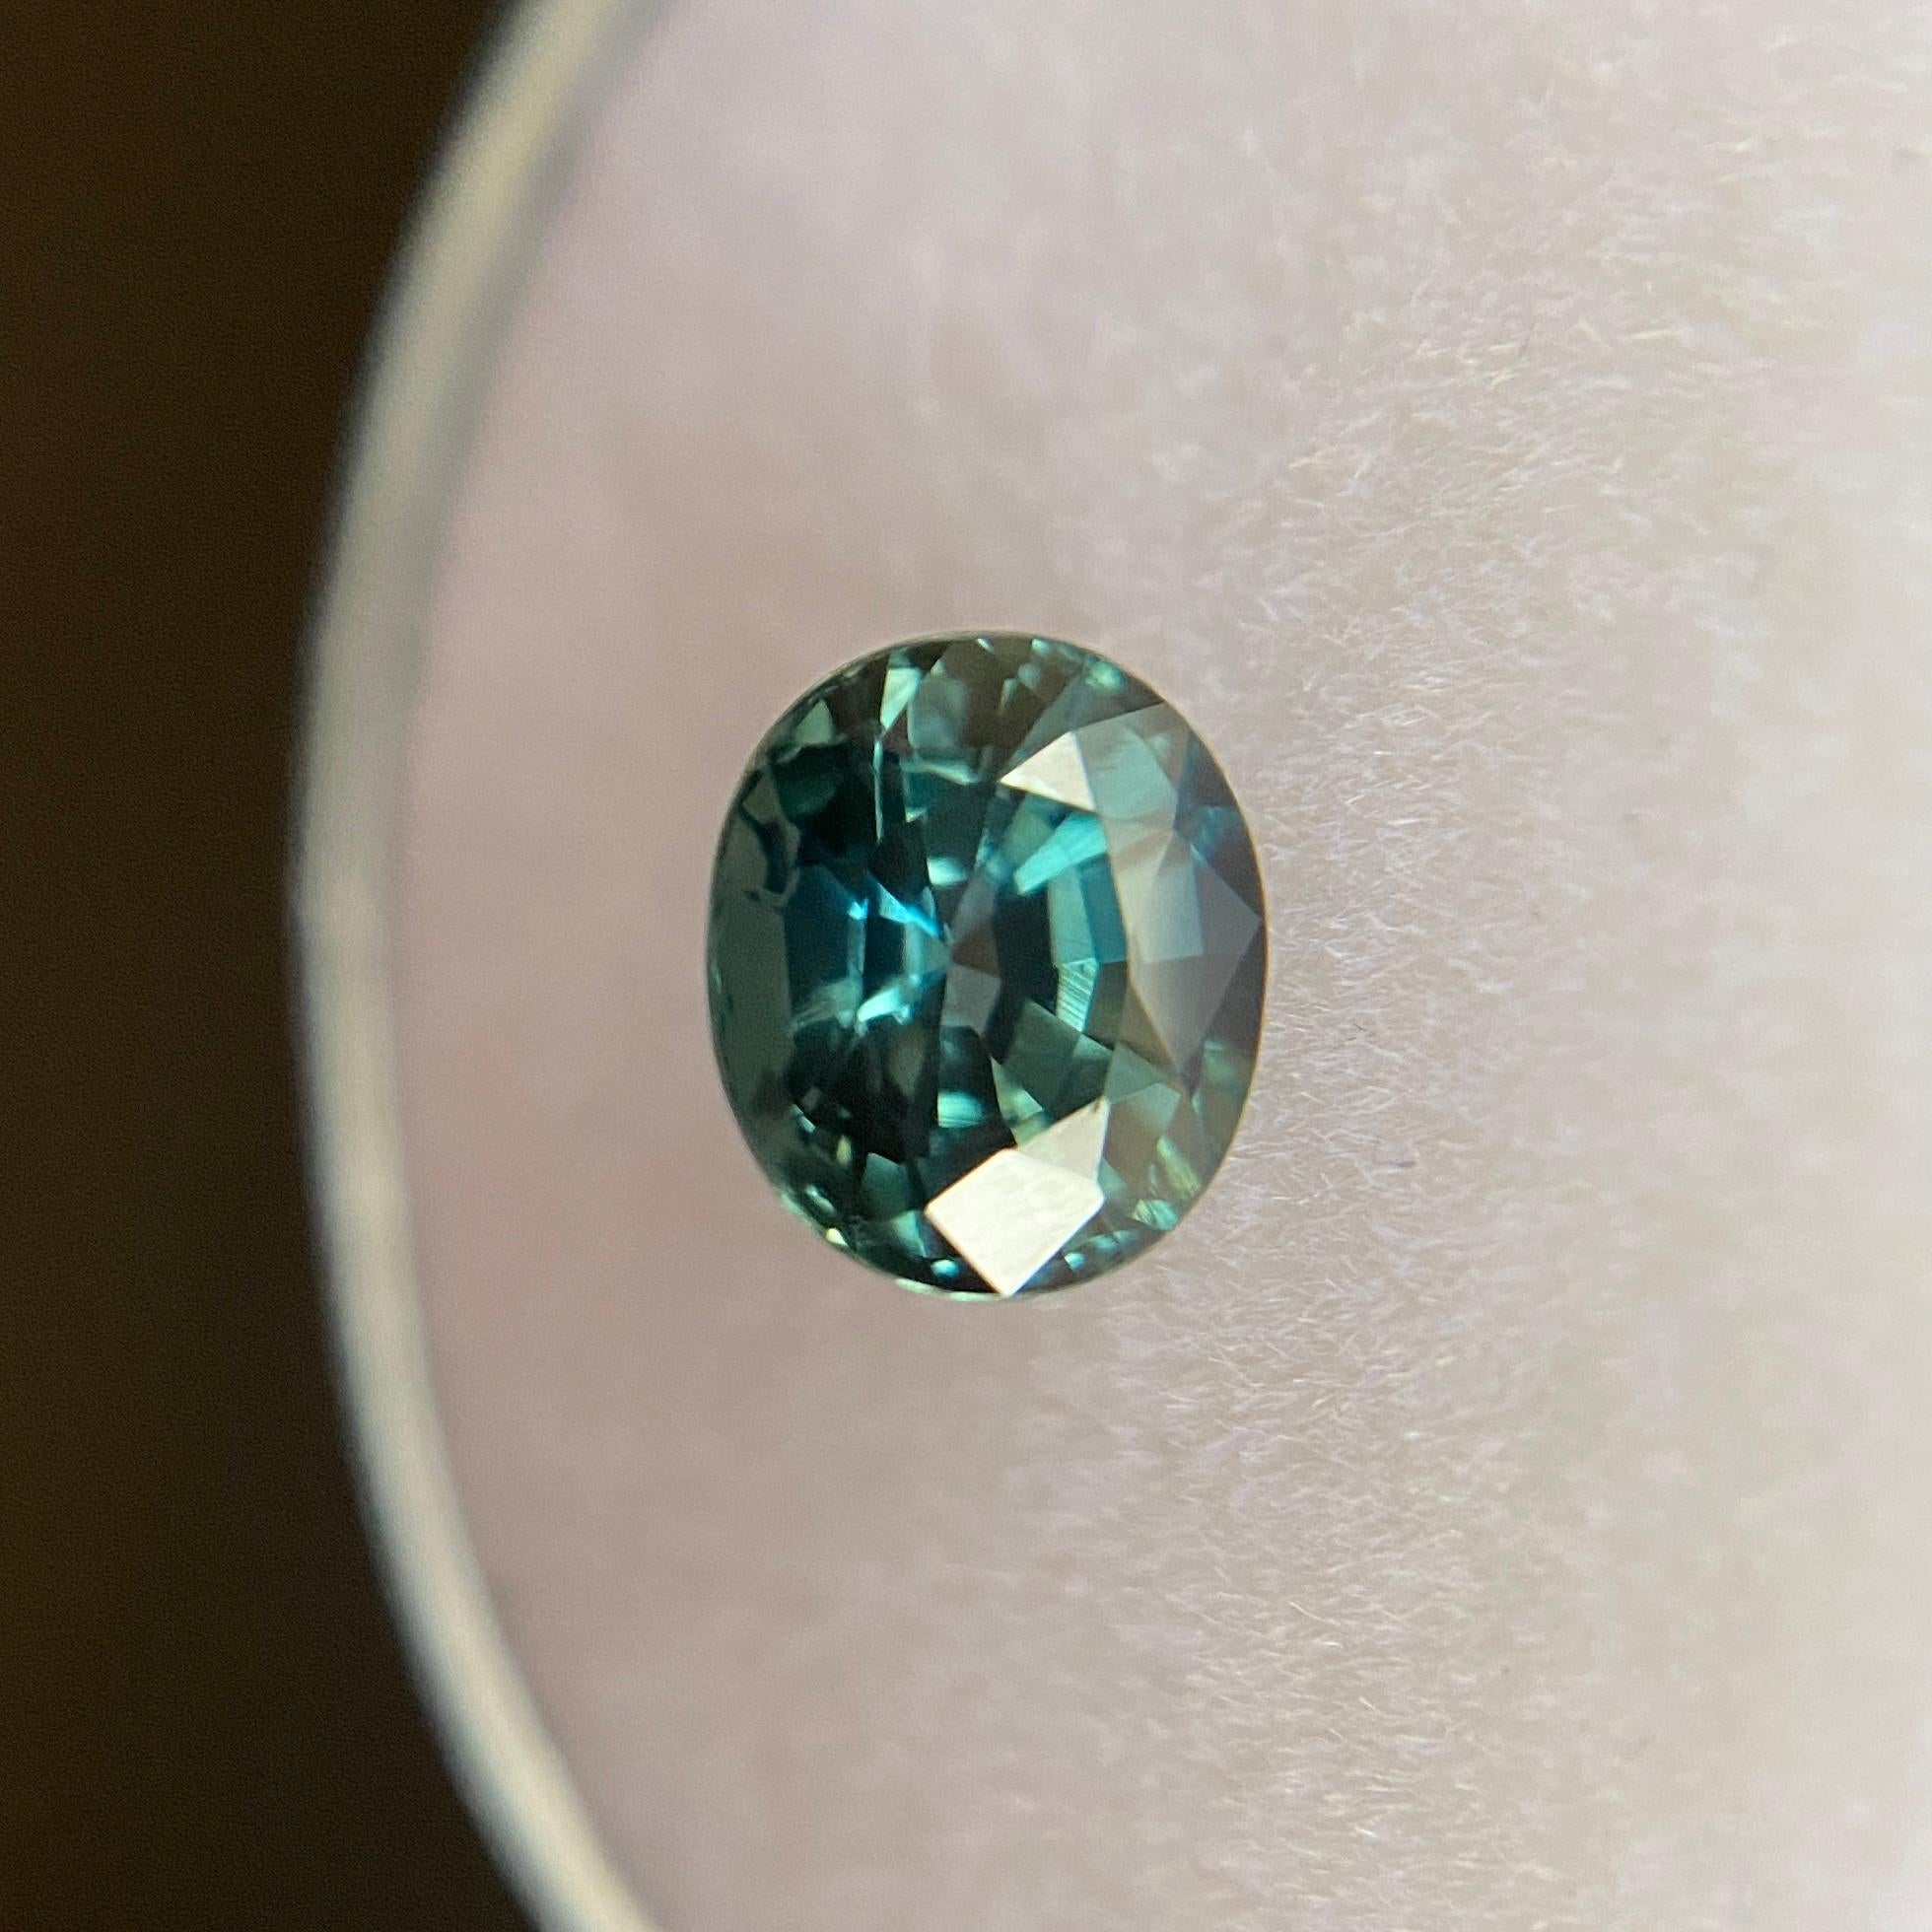 teal sapphire loose stone